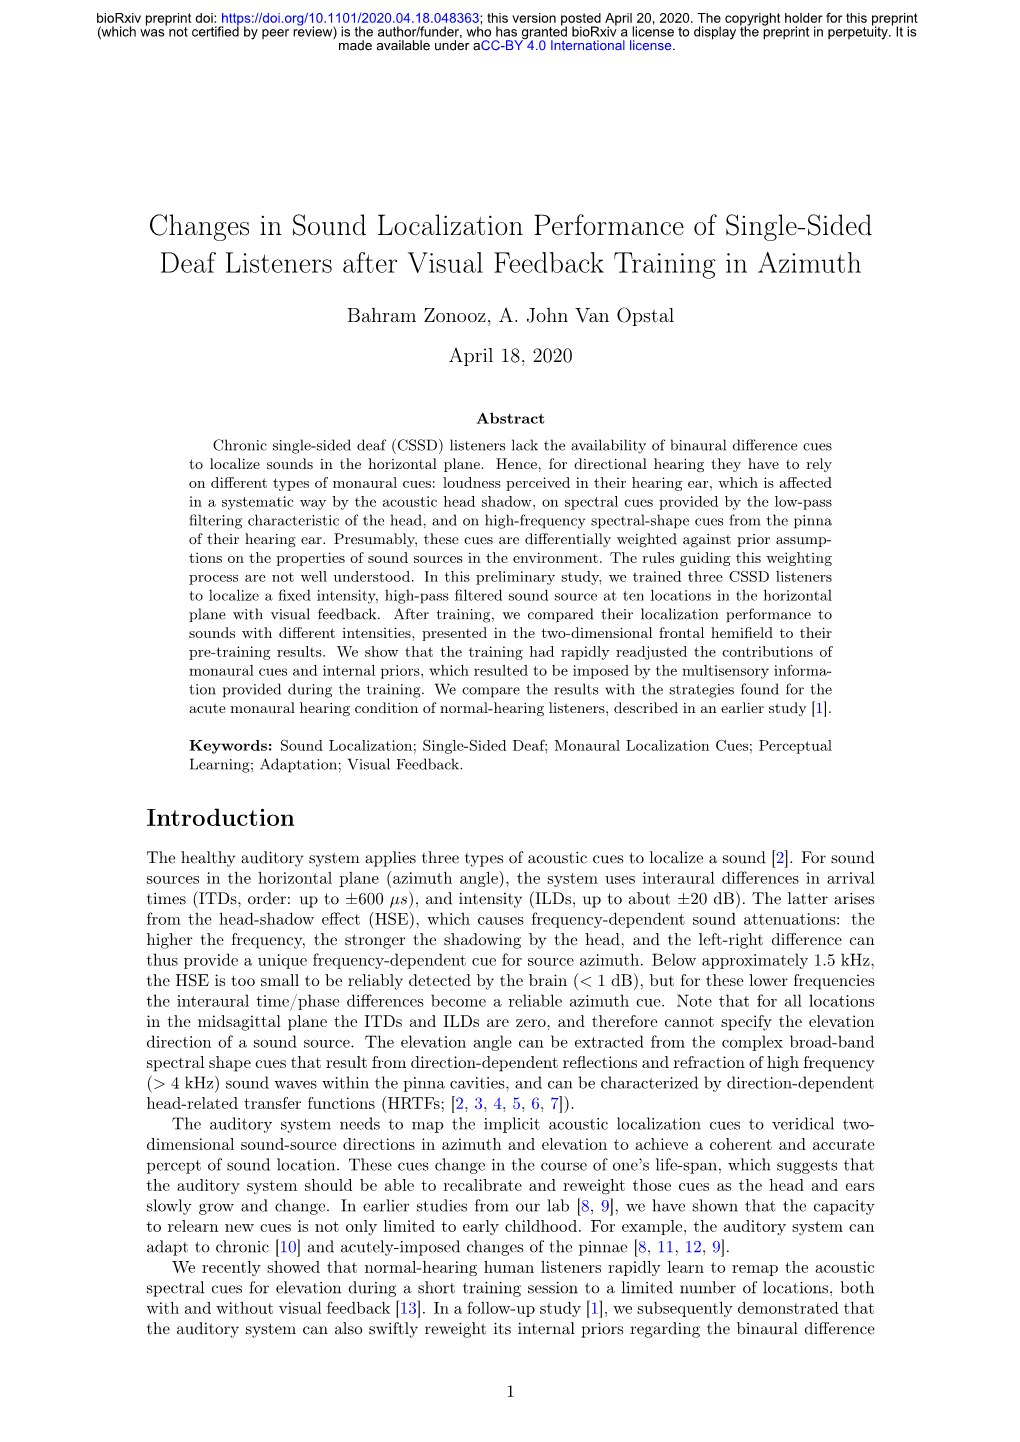 Changes in Sound Localization Performance of Single-Sided Deaf Listeners After Visual Feedback Training in Azimuth